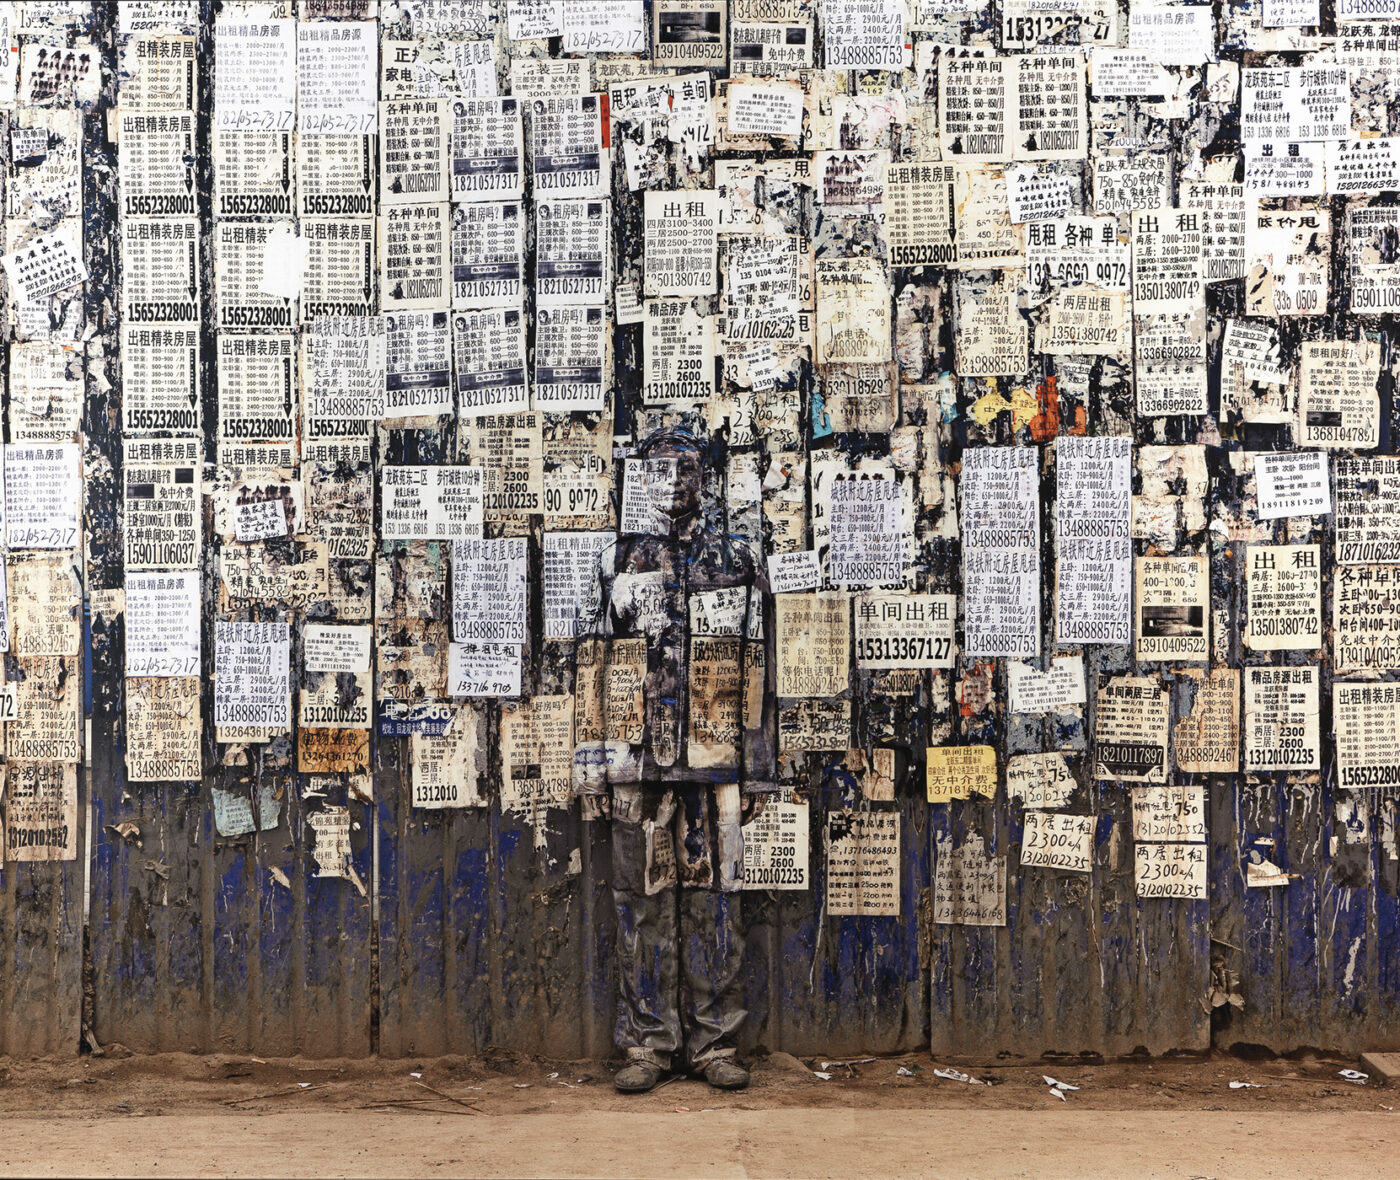 A man's body is camouflaged by posters covering a dirty wall